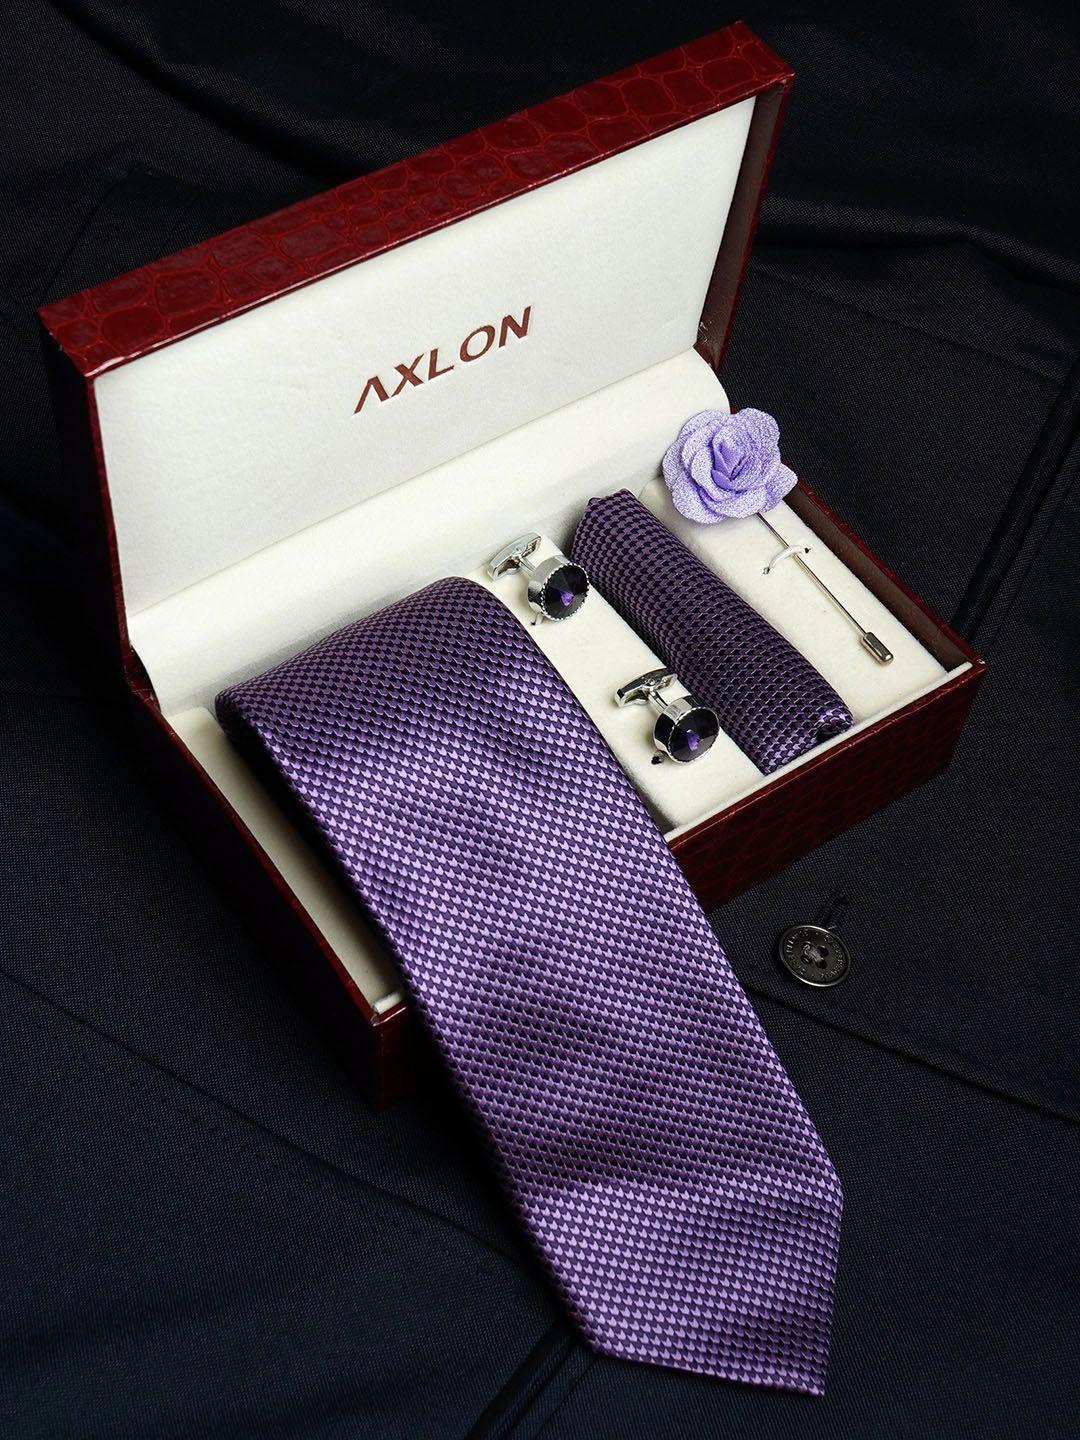 axlon set of 4 printed necktie pocket square with cufflink & flower pin accessory gift set